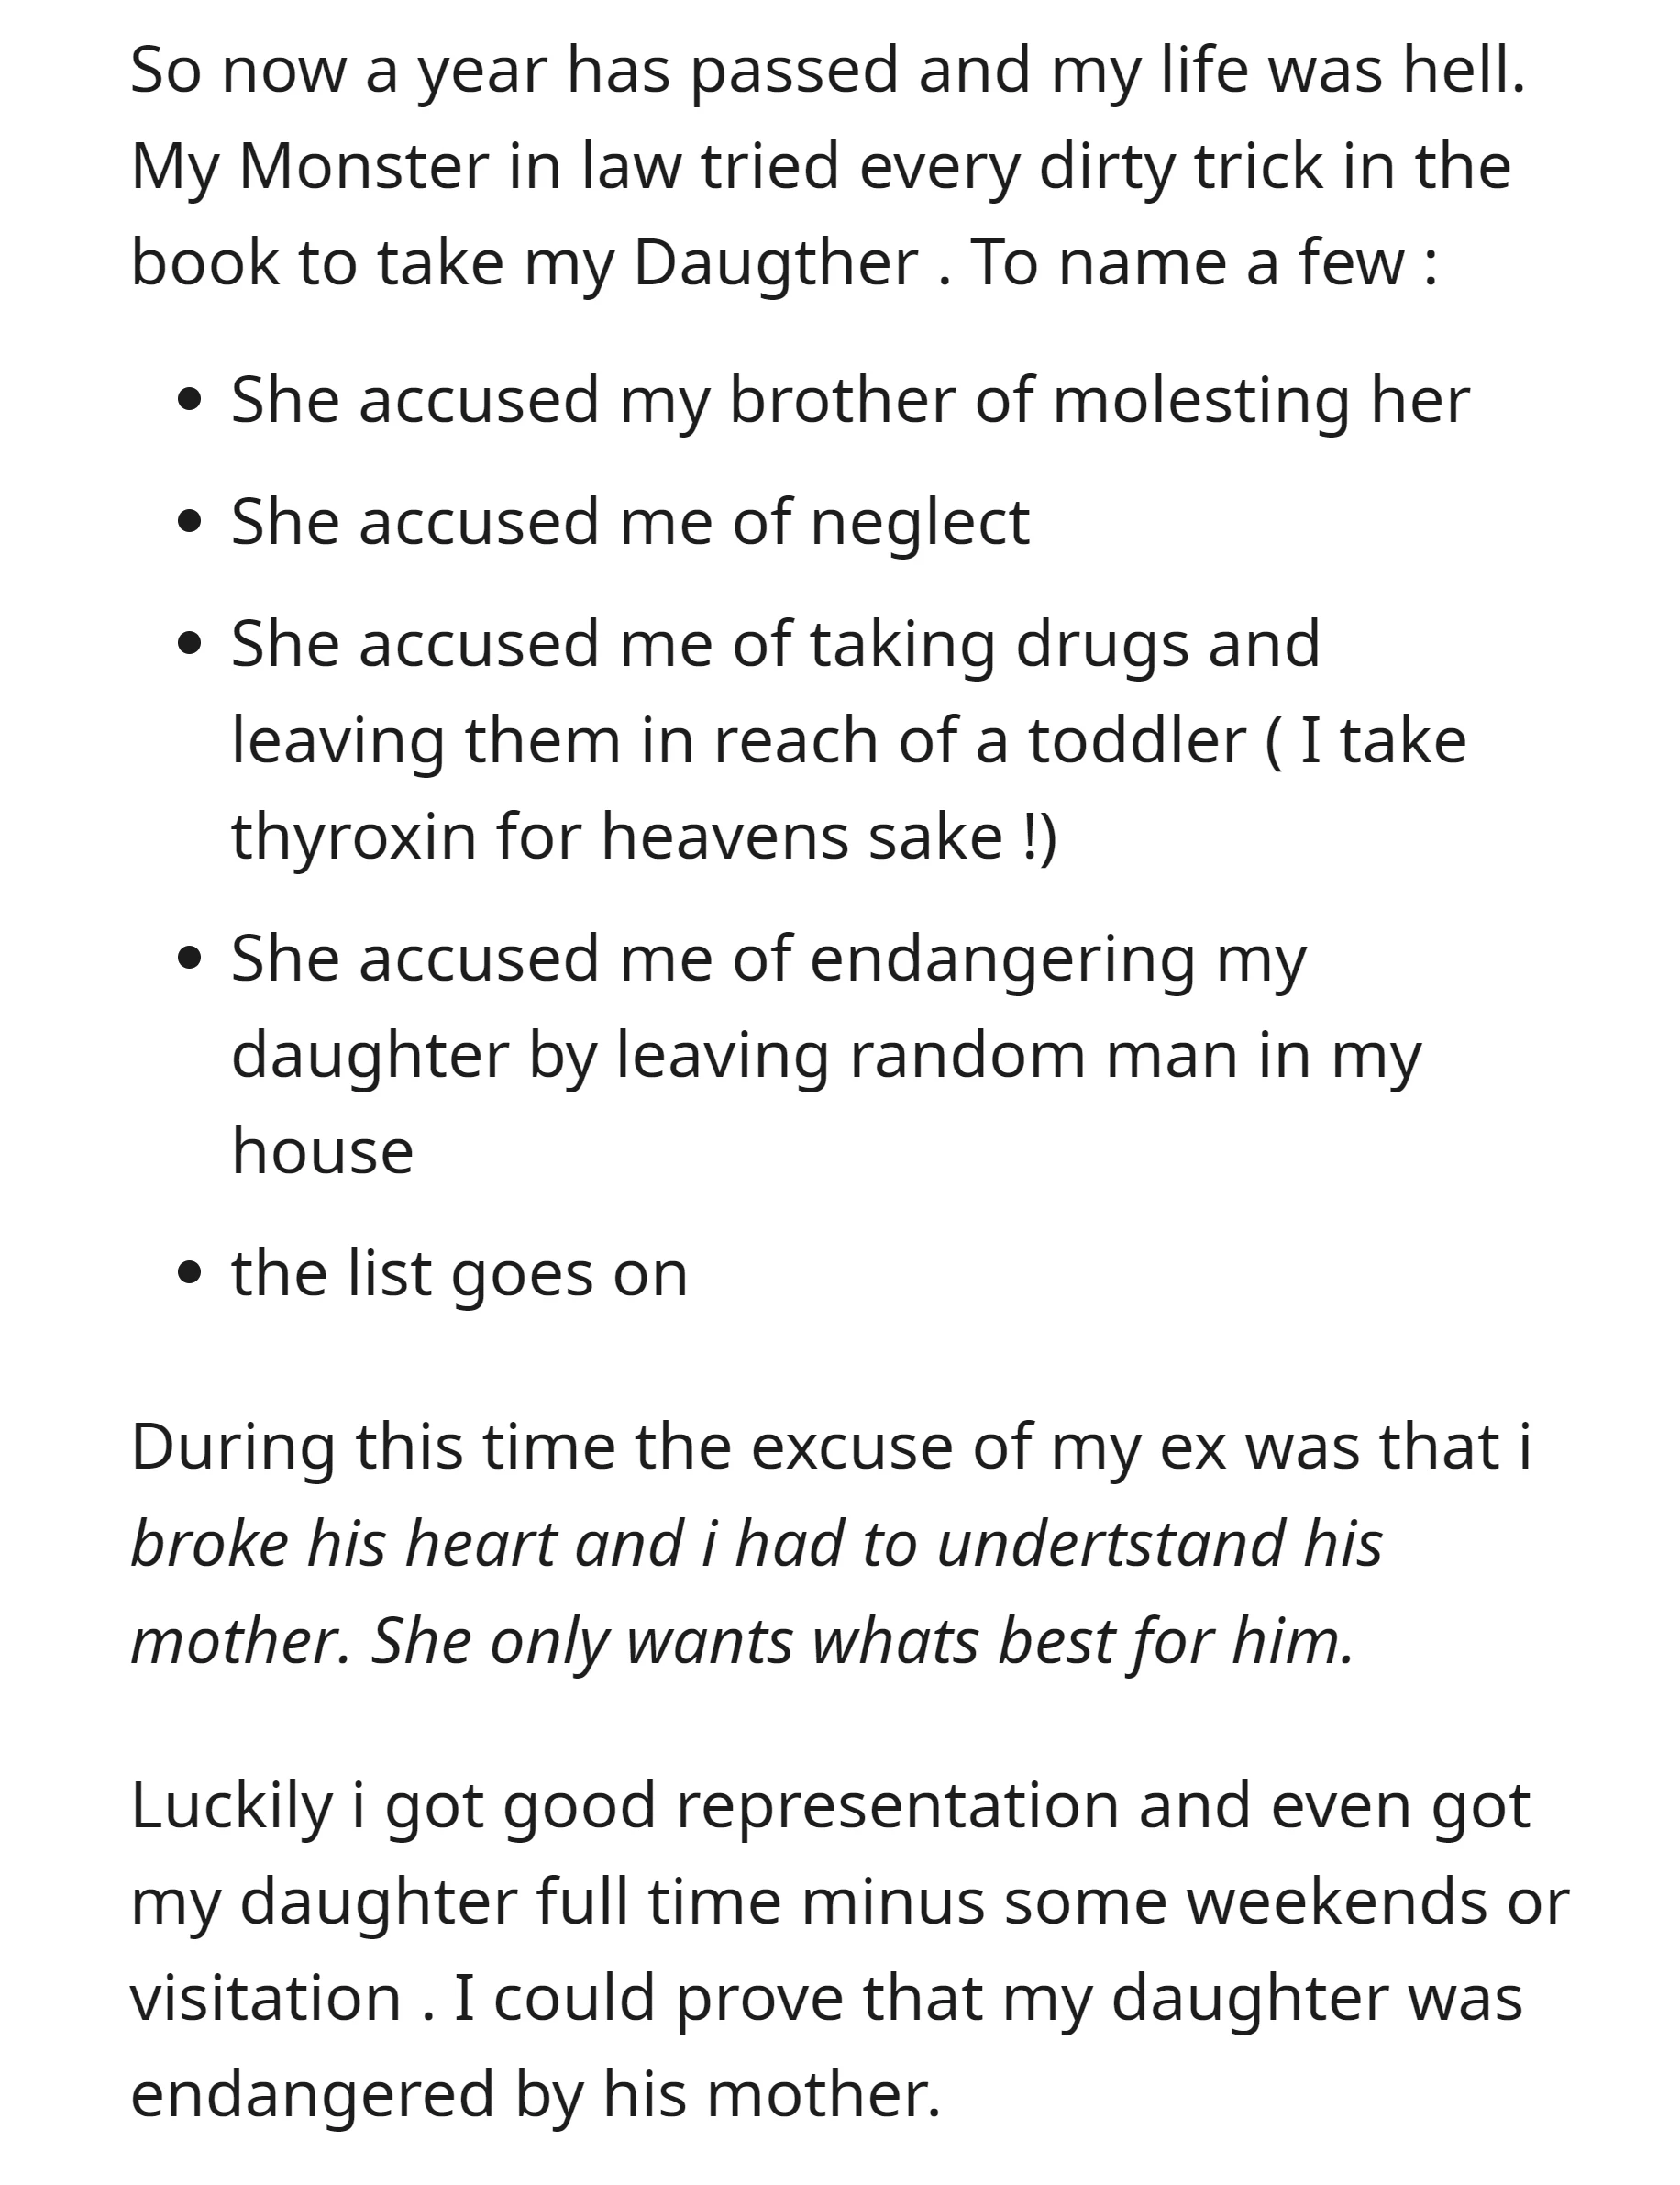 Her ex-mother-in-law used various false accusations to try to take her daughter